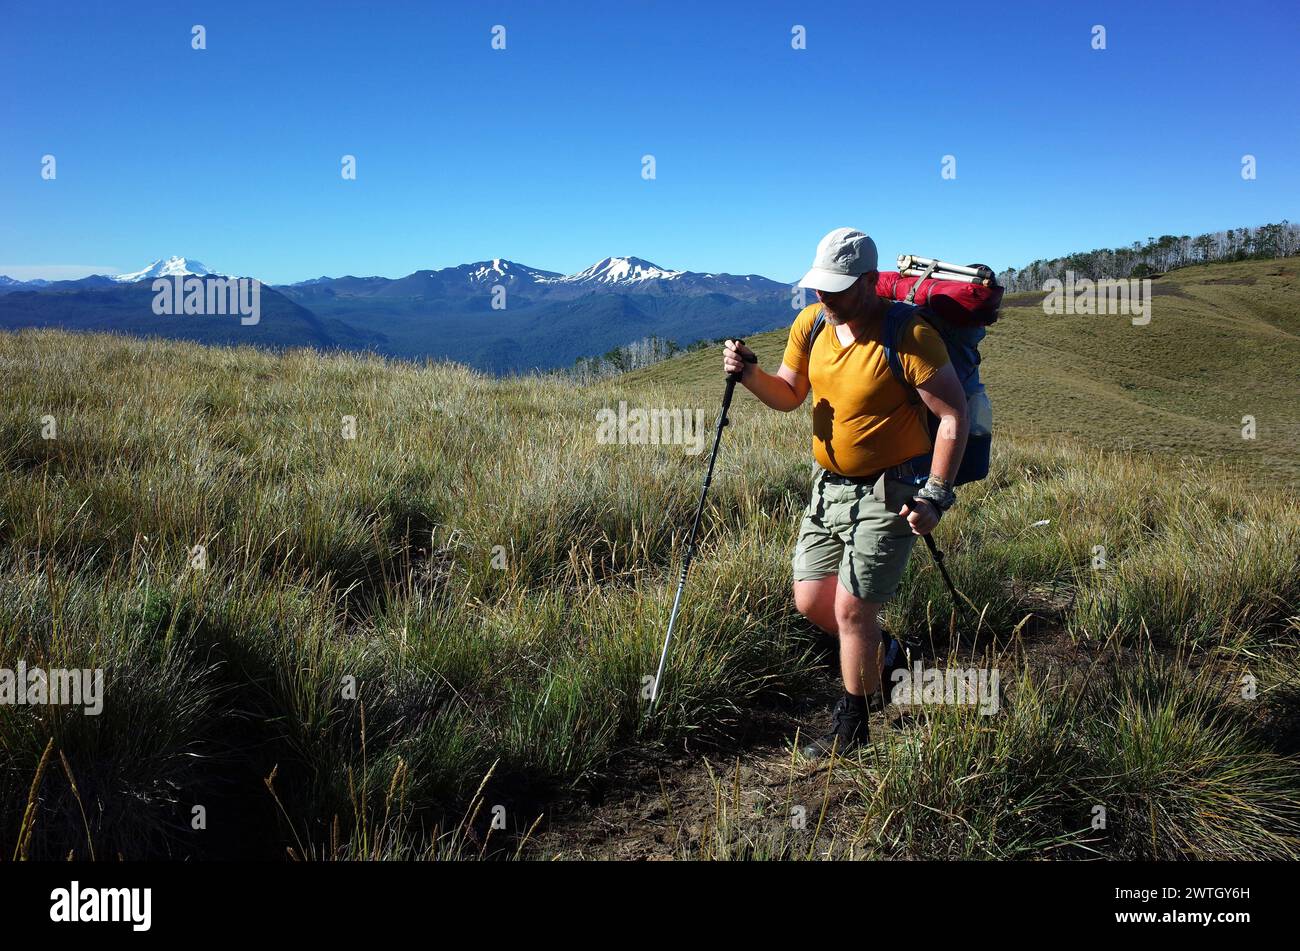 Man with backpack solo hiking on grassy highland mountain landscape in Puyehue National Park, Los Lagos Region, Chile. Volcan Tronador on horizon left Stock Photo